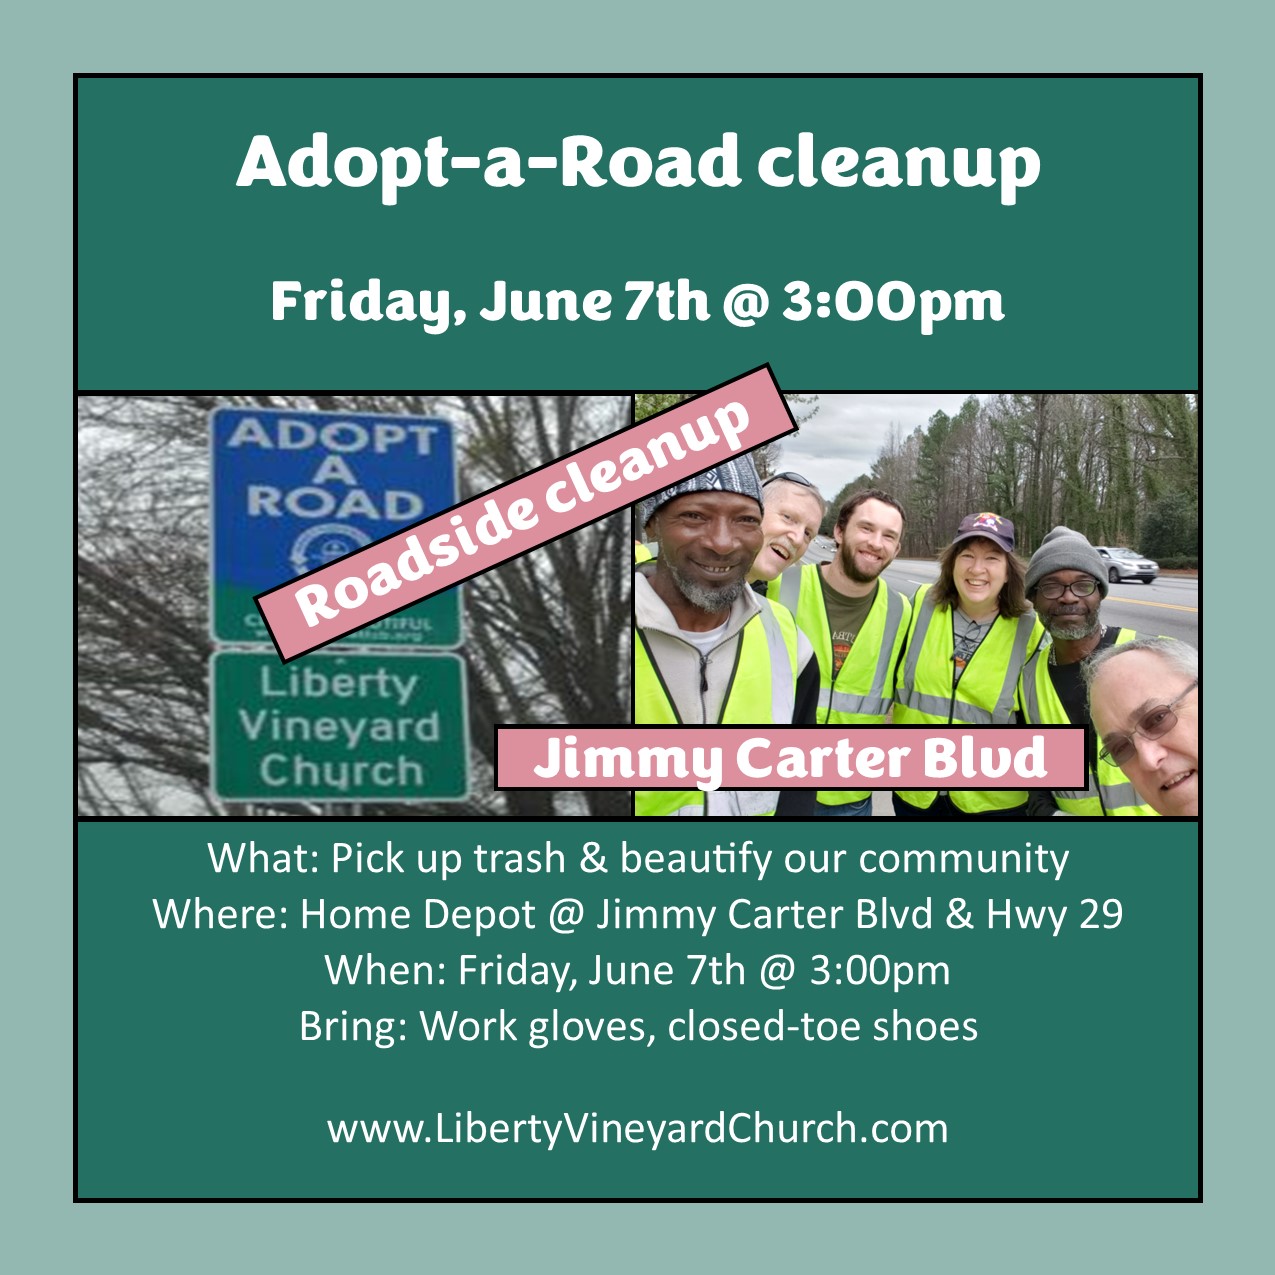 Adopt-a-Road cleanup (Friday, Jun 7th @ 3:00pm)